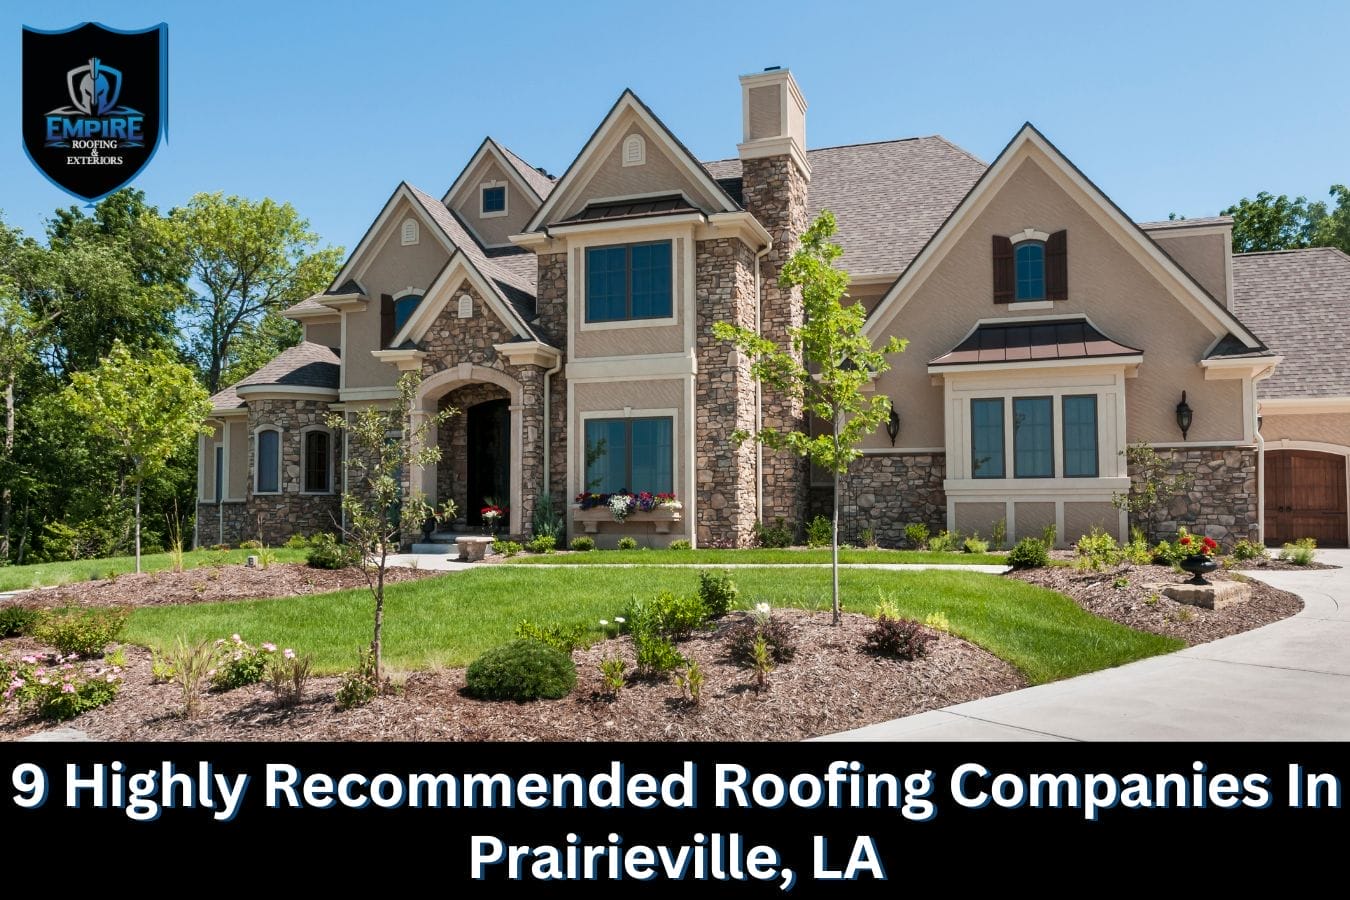 9 Highly Recommended Roofing Companies In Prairieville, LA